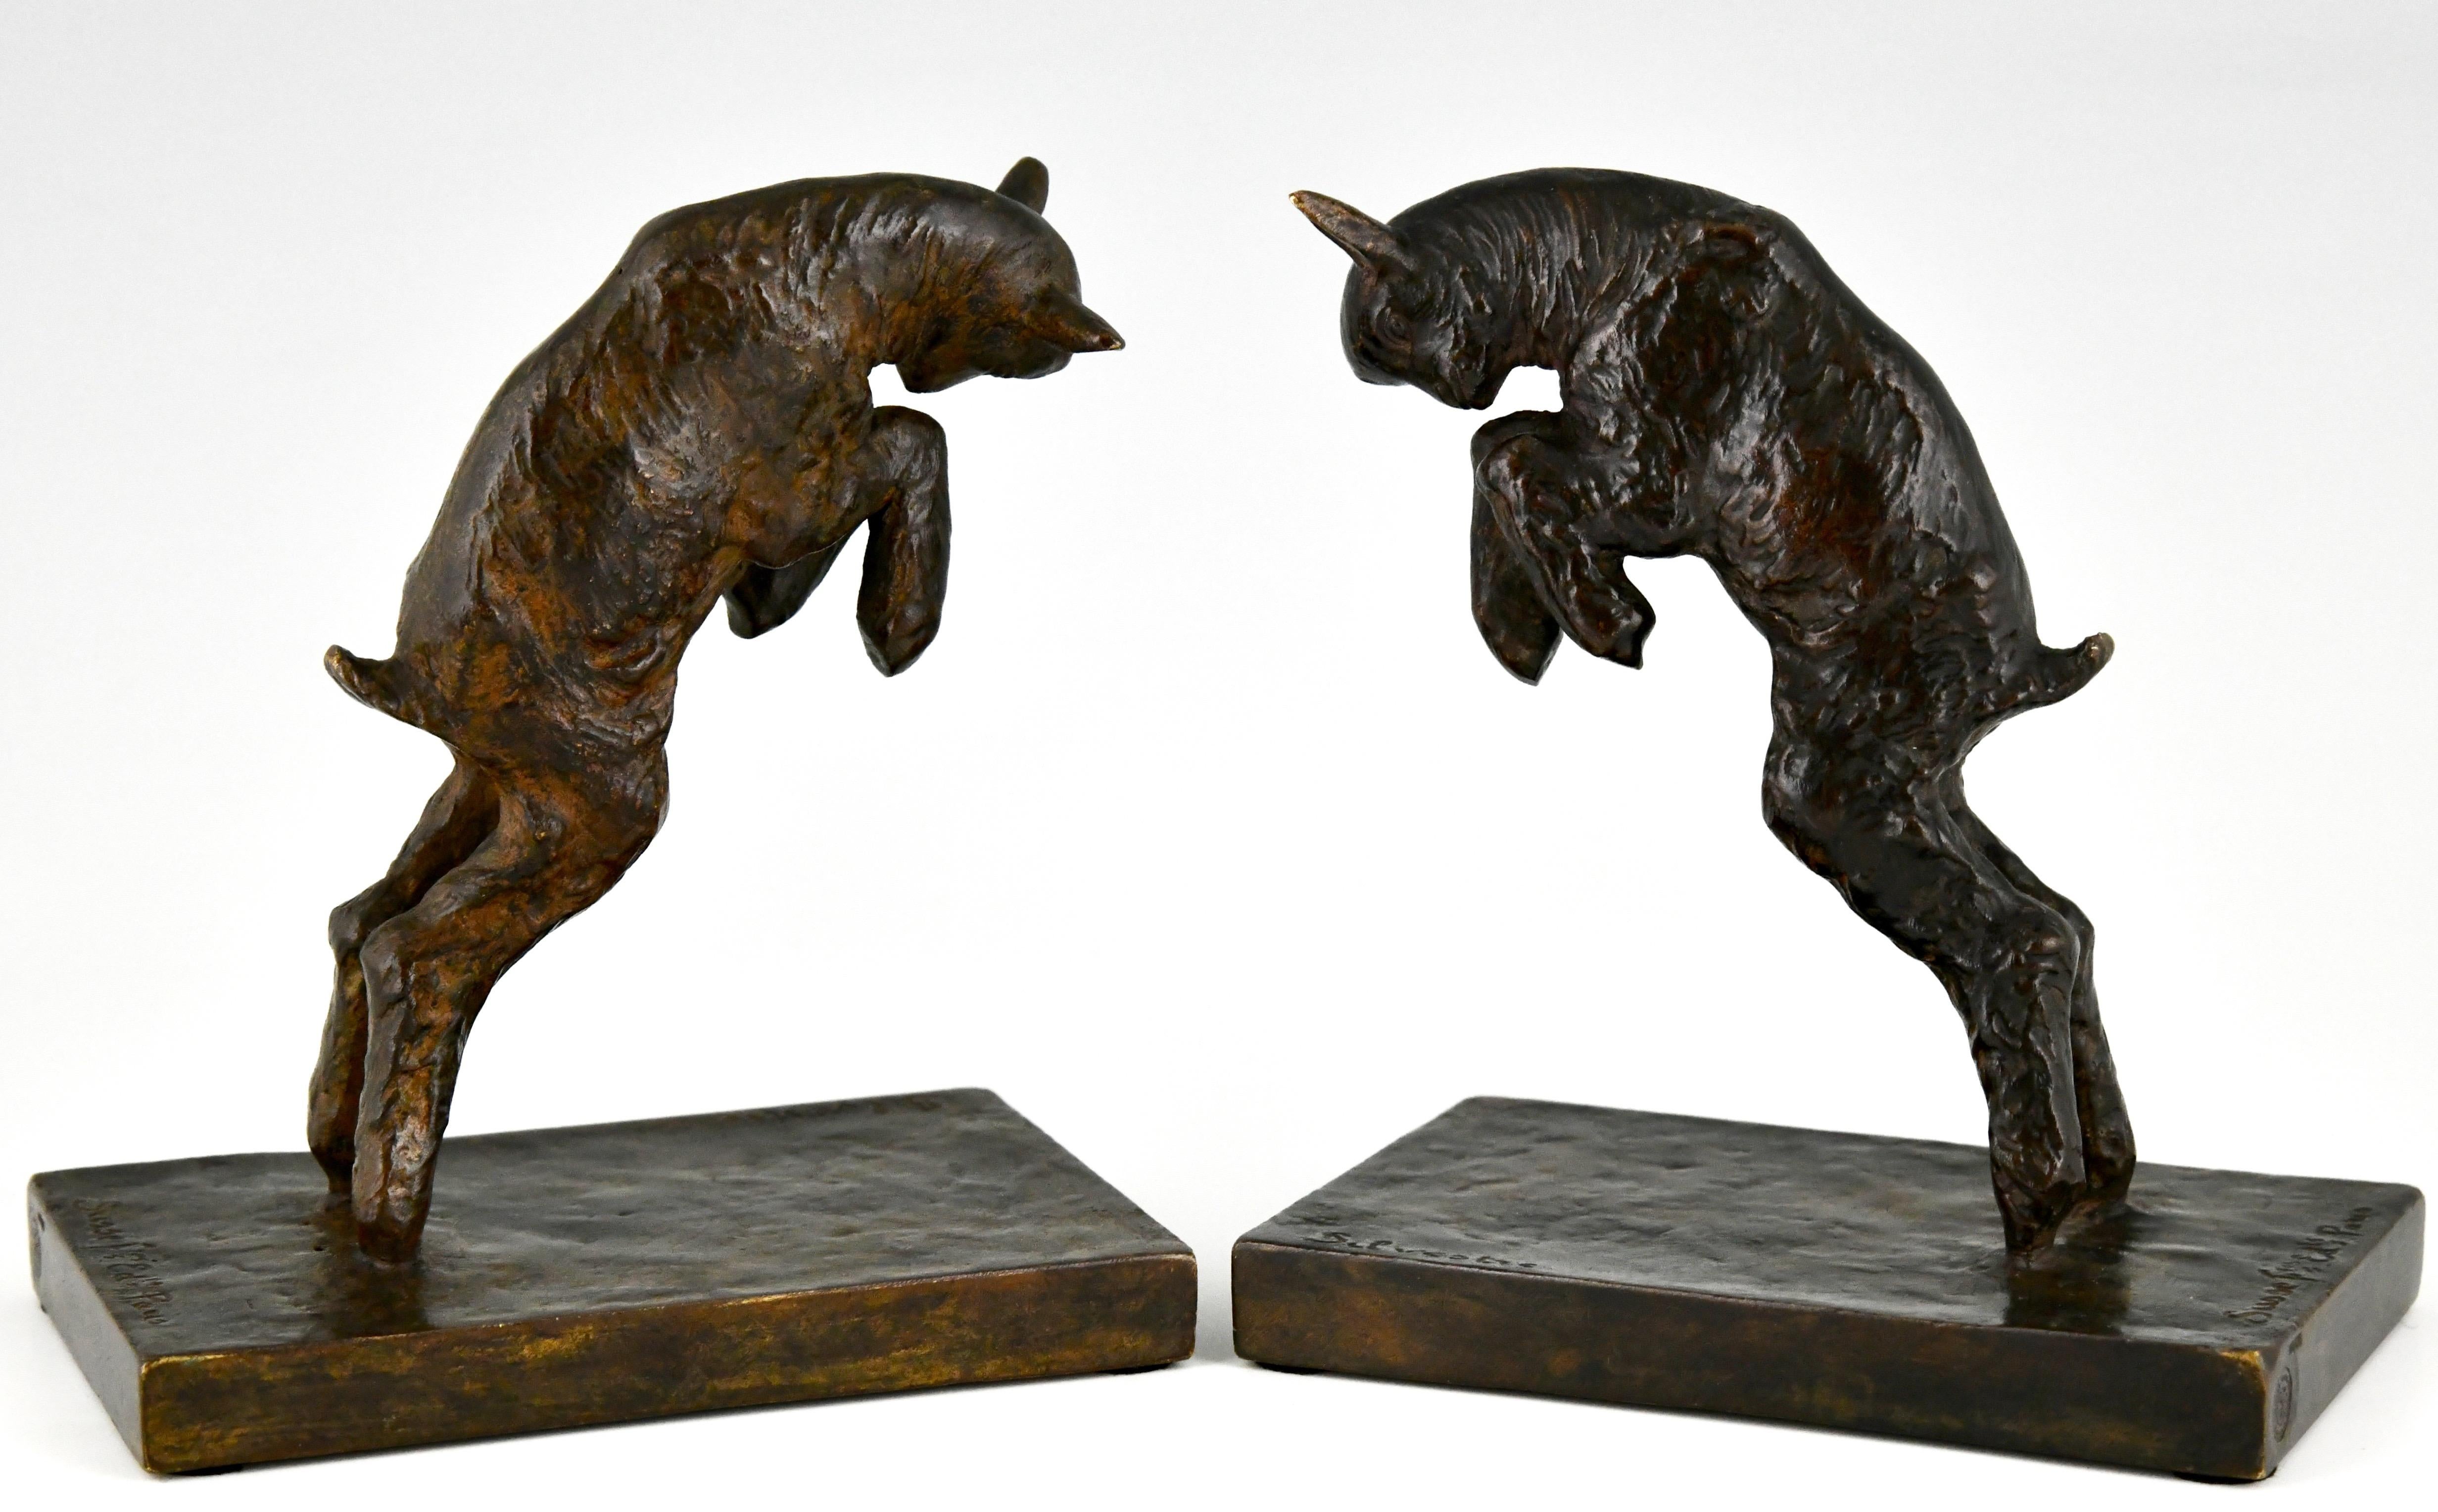 Art Deco bronze lamb bookends. By Paul Silvestre, with foundry mark, Susse Frères, Paris.
This model is illustrated in Animals in bronze by Christopher Payne. Antique collectors club. 

More information: The dictionary of sculptors in bronze by